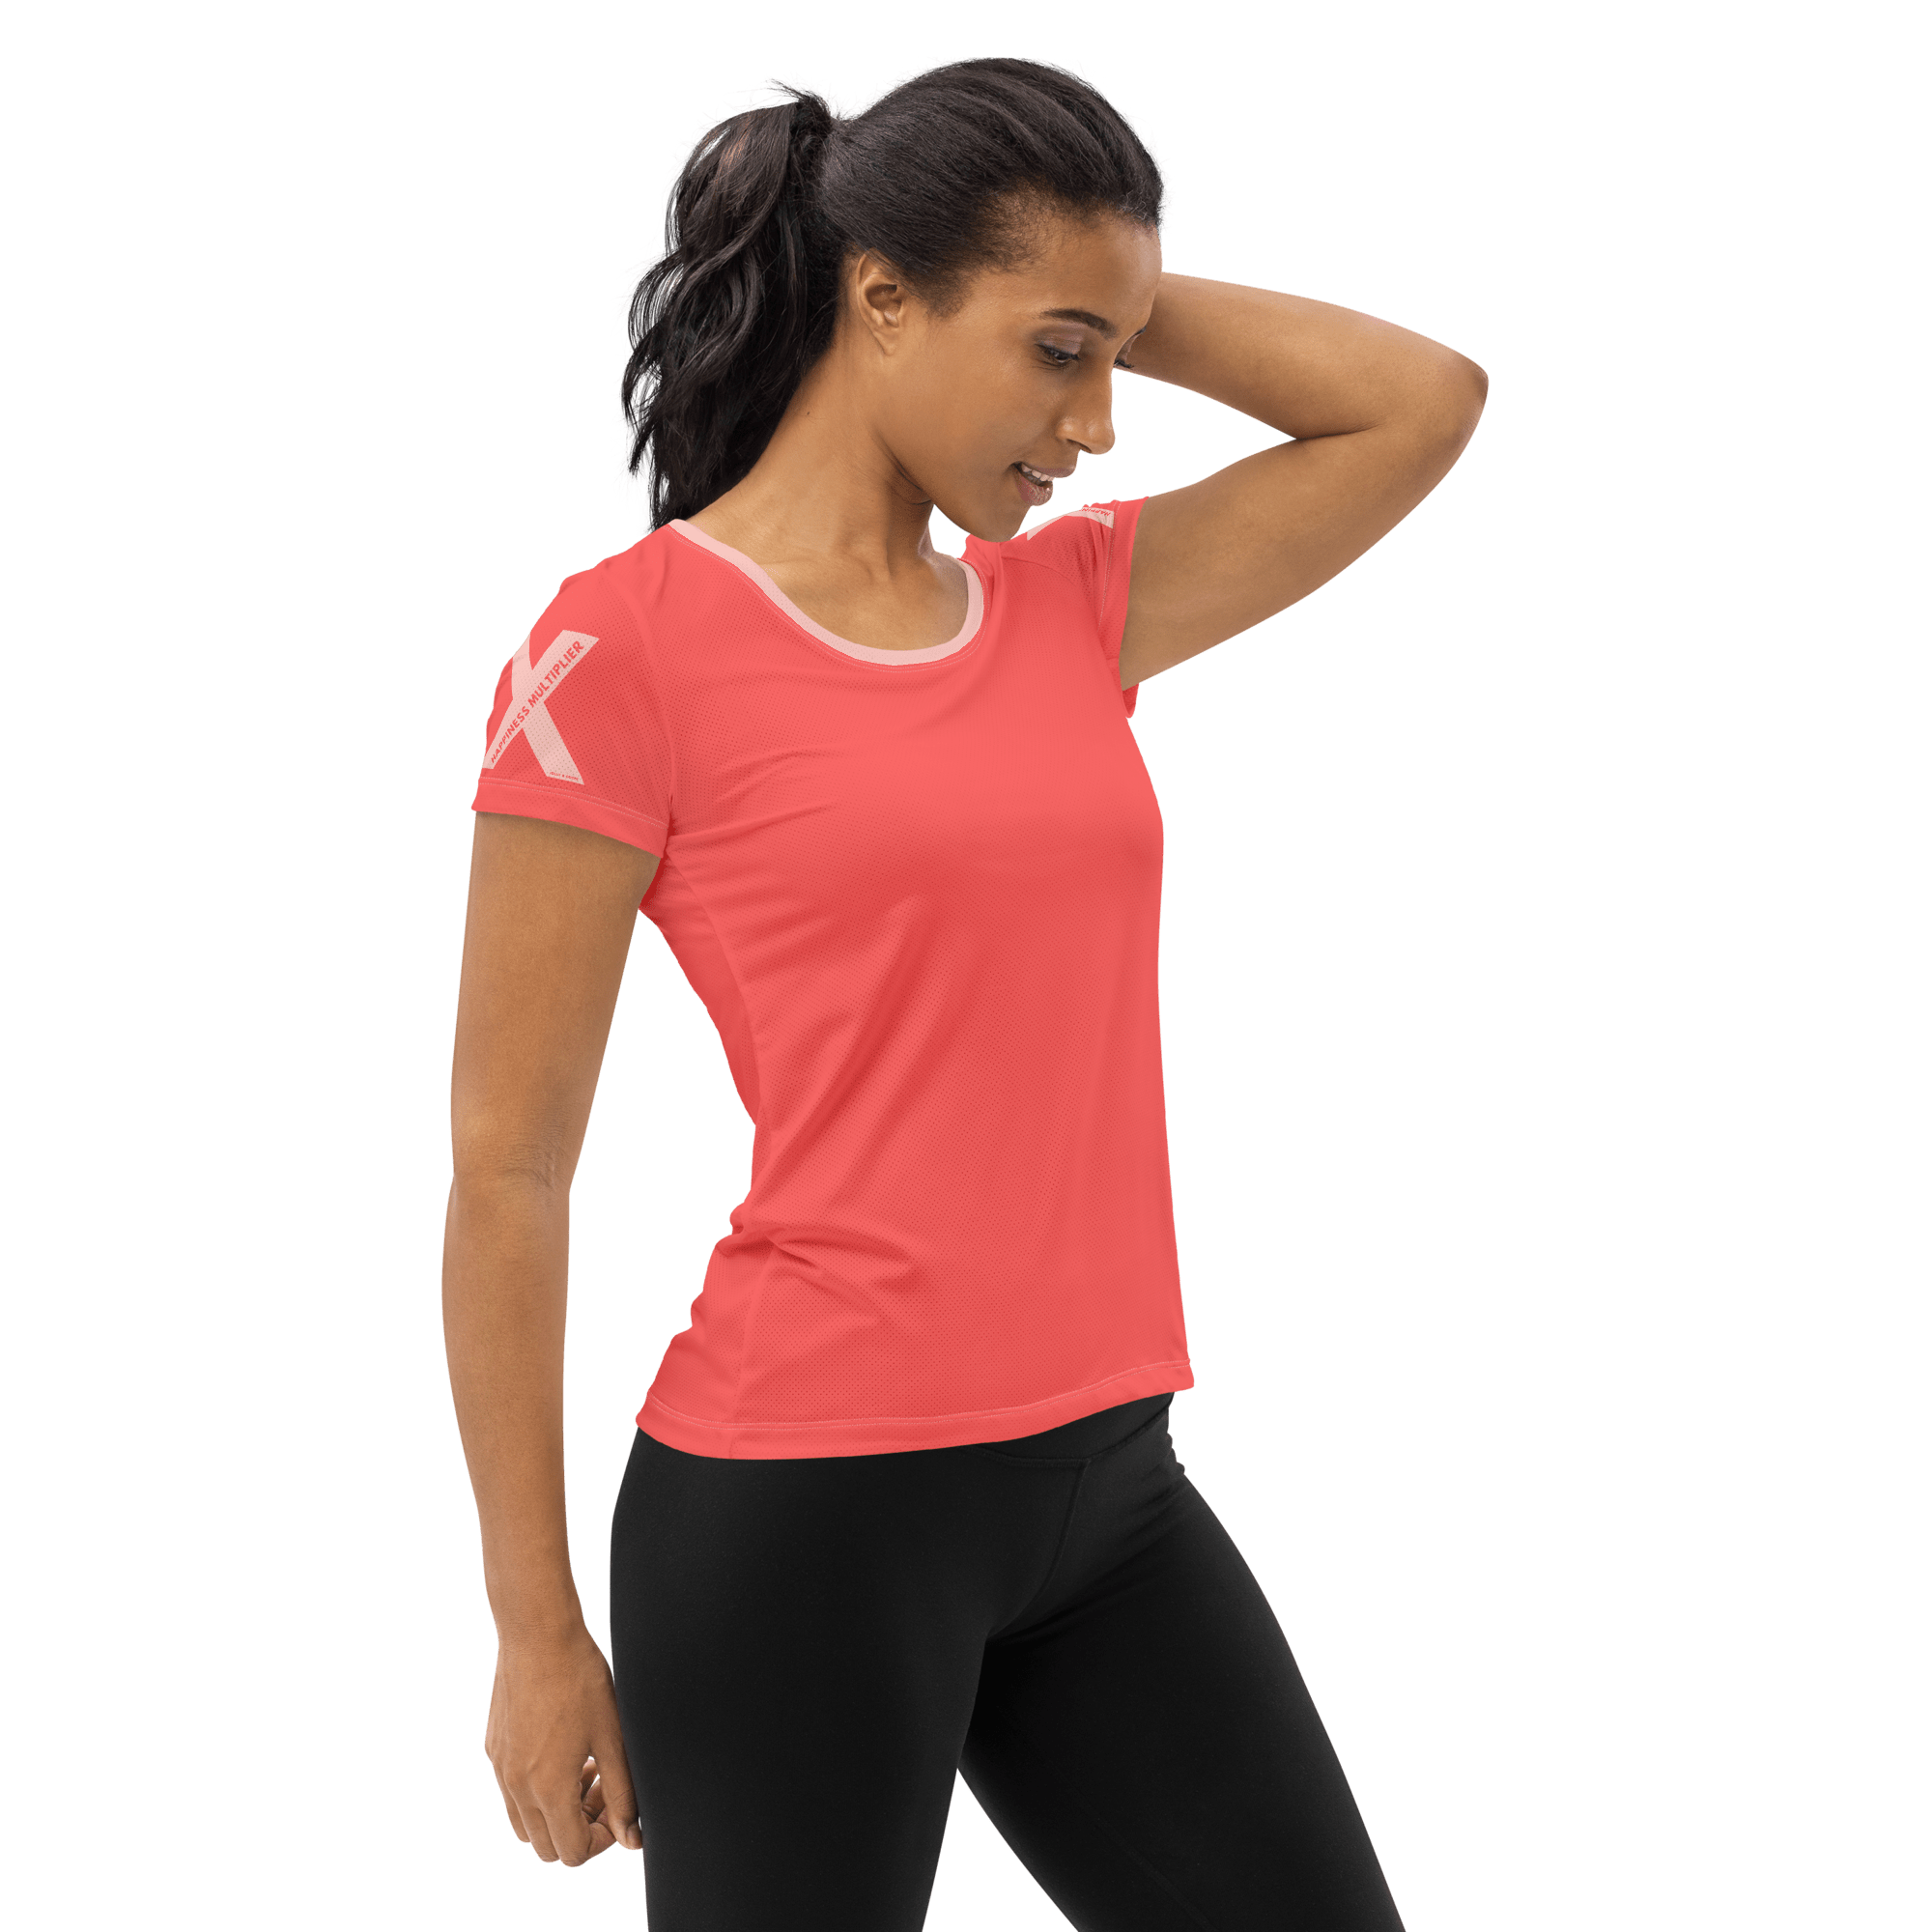 Happiness Multiplier Call to Arms Women's Athletic Shirt